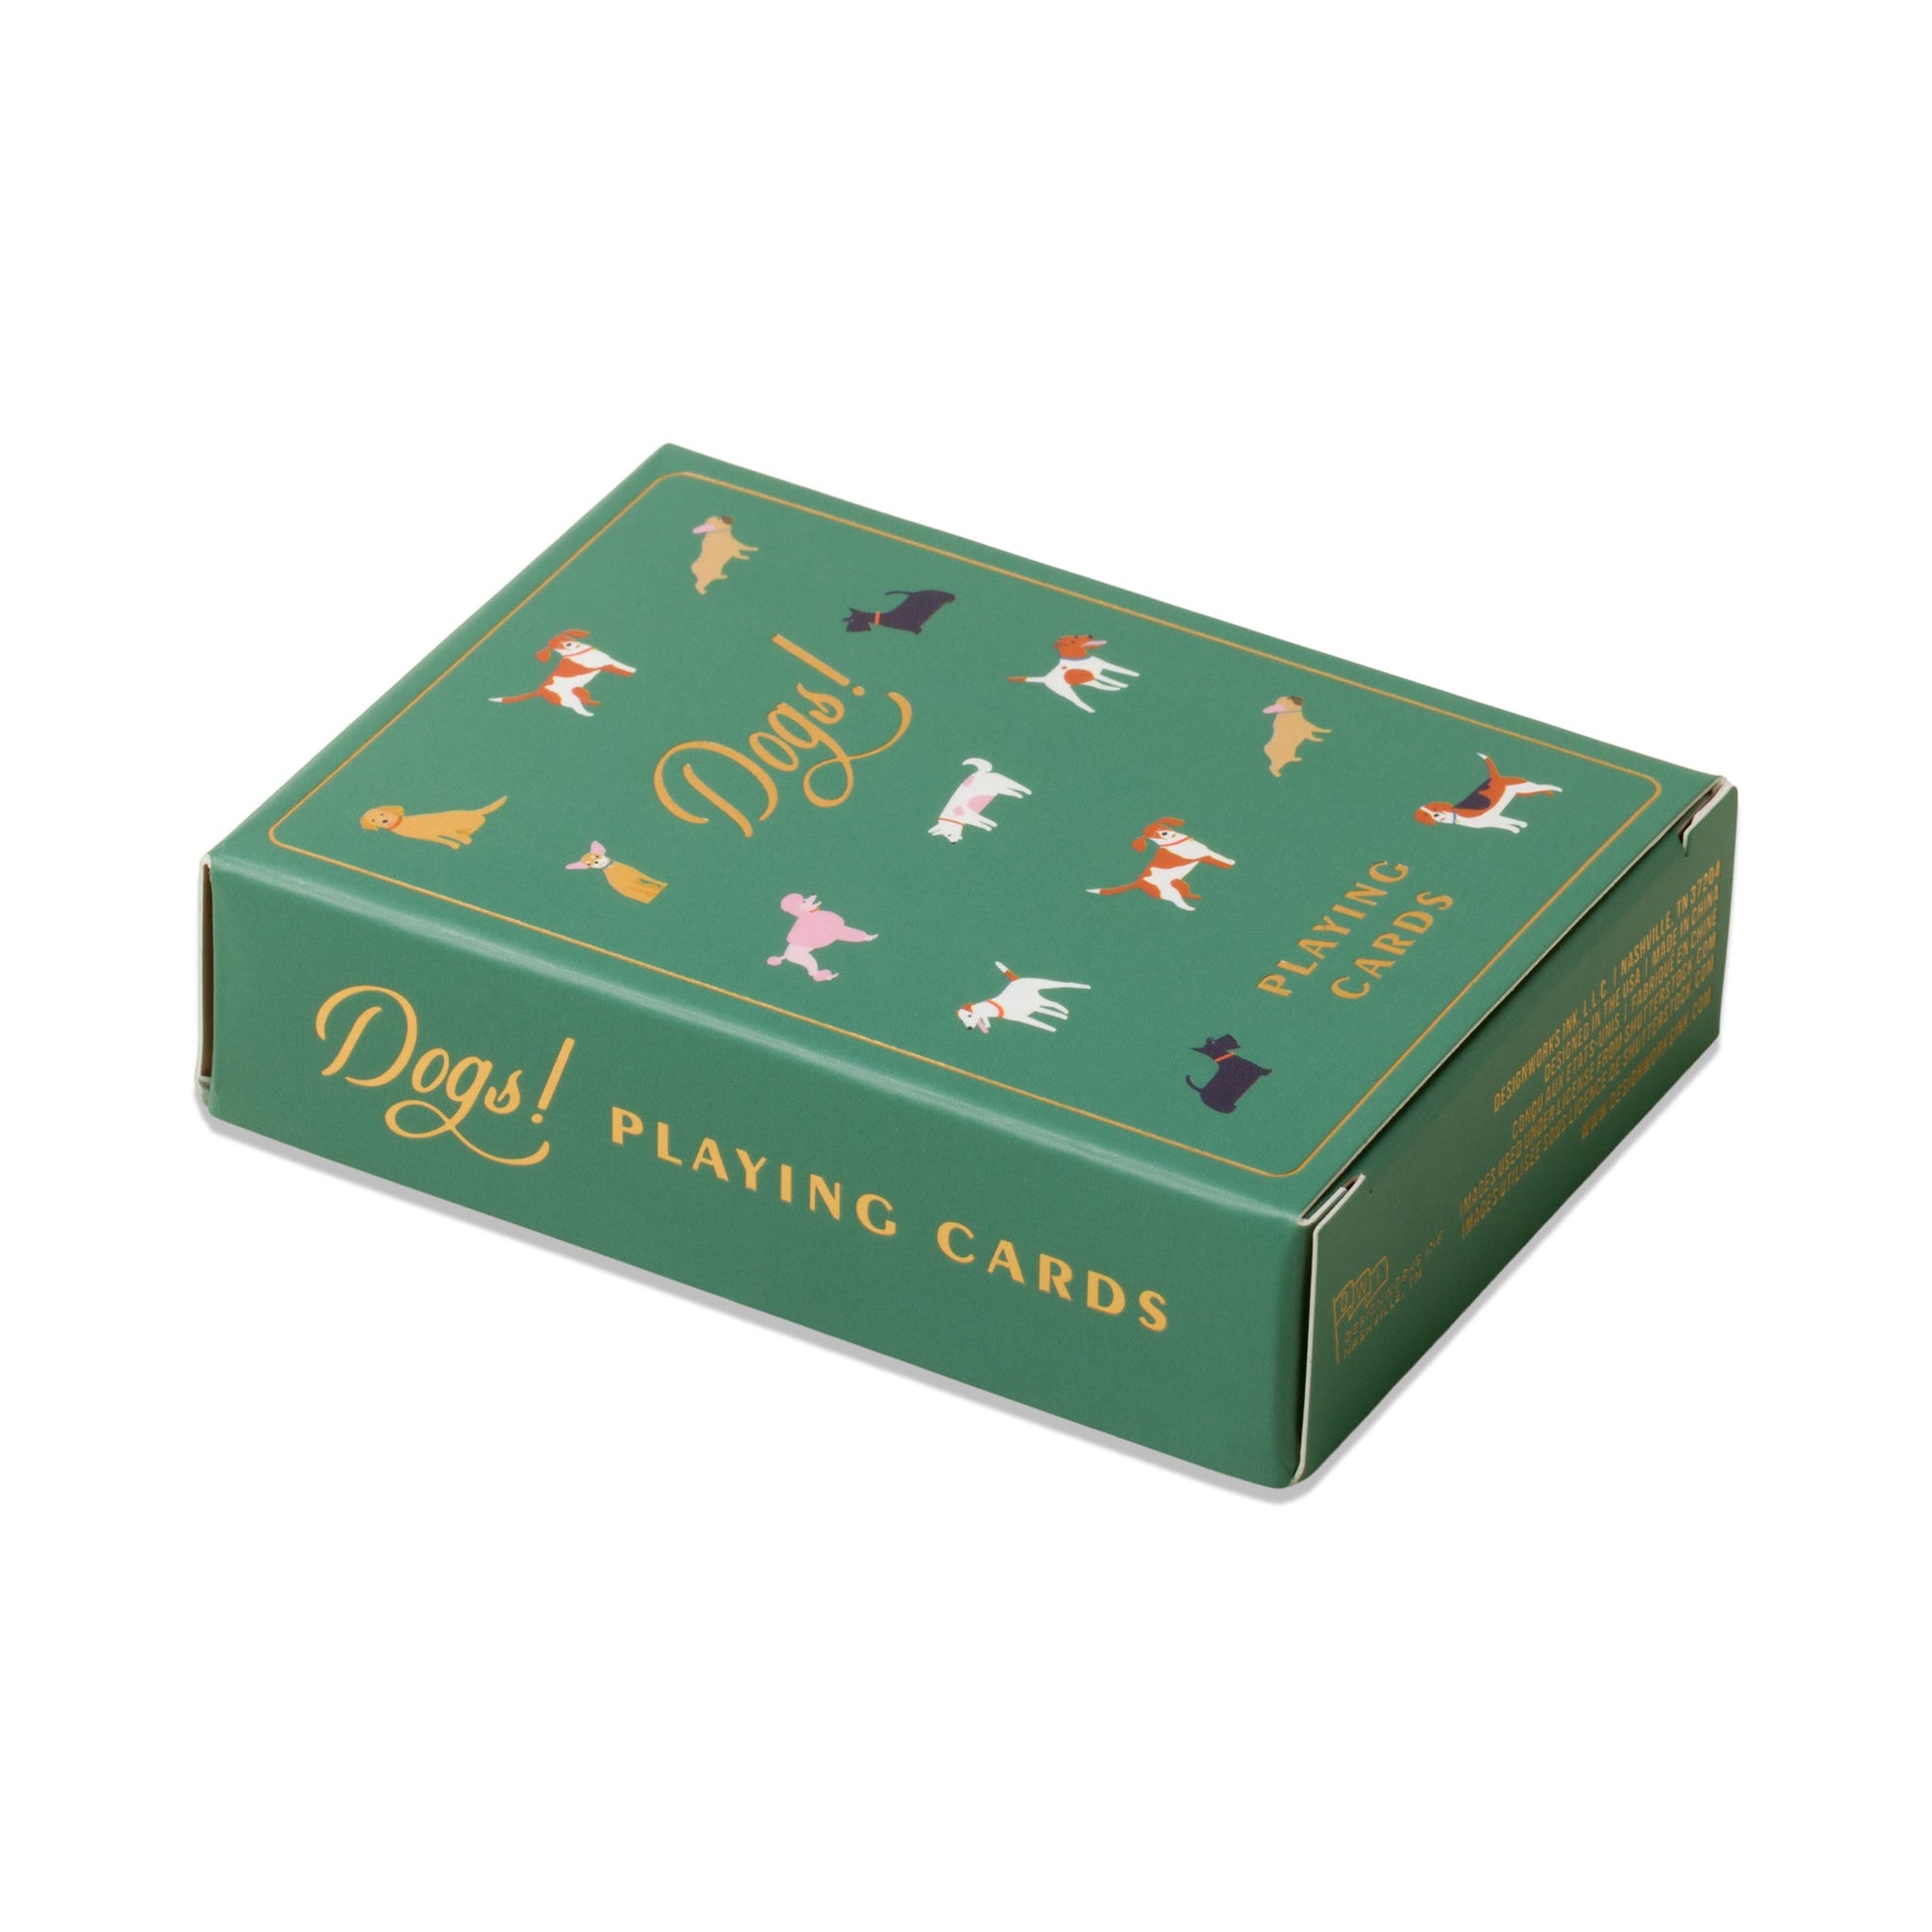 Playing Cards - Dogs - box with dogs 